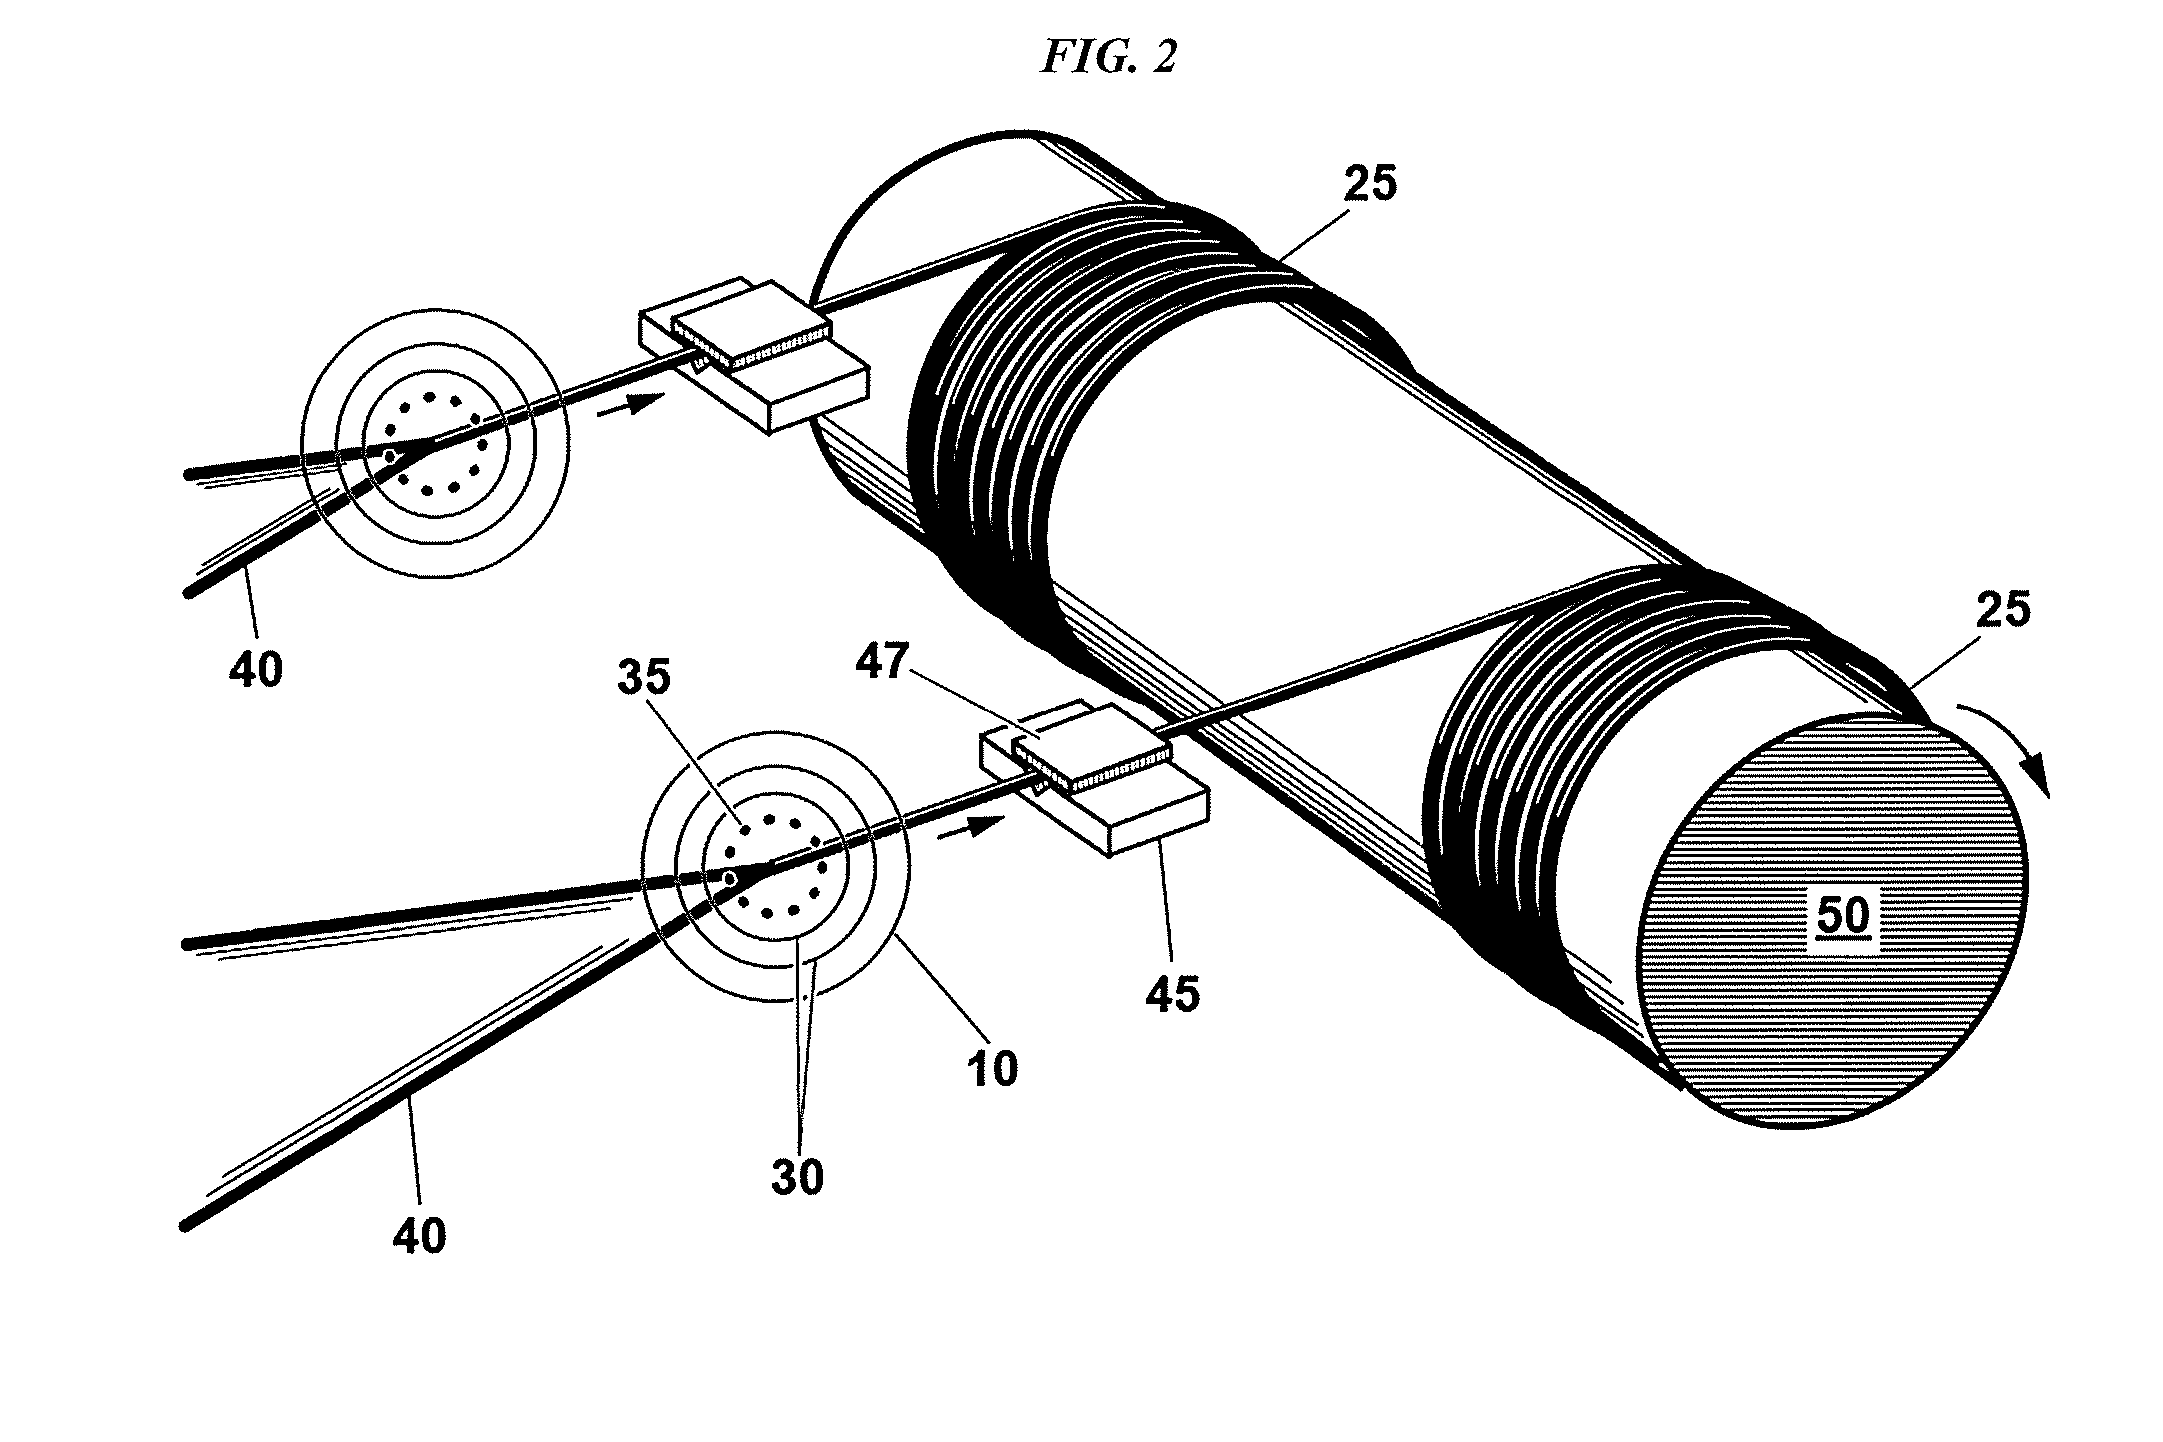 Method and Apparatus for Fabricating Fibers and Microstructures from Disparate Molar Mass Precursors